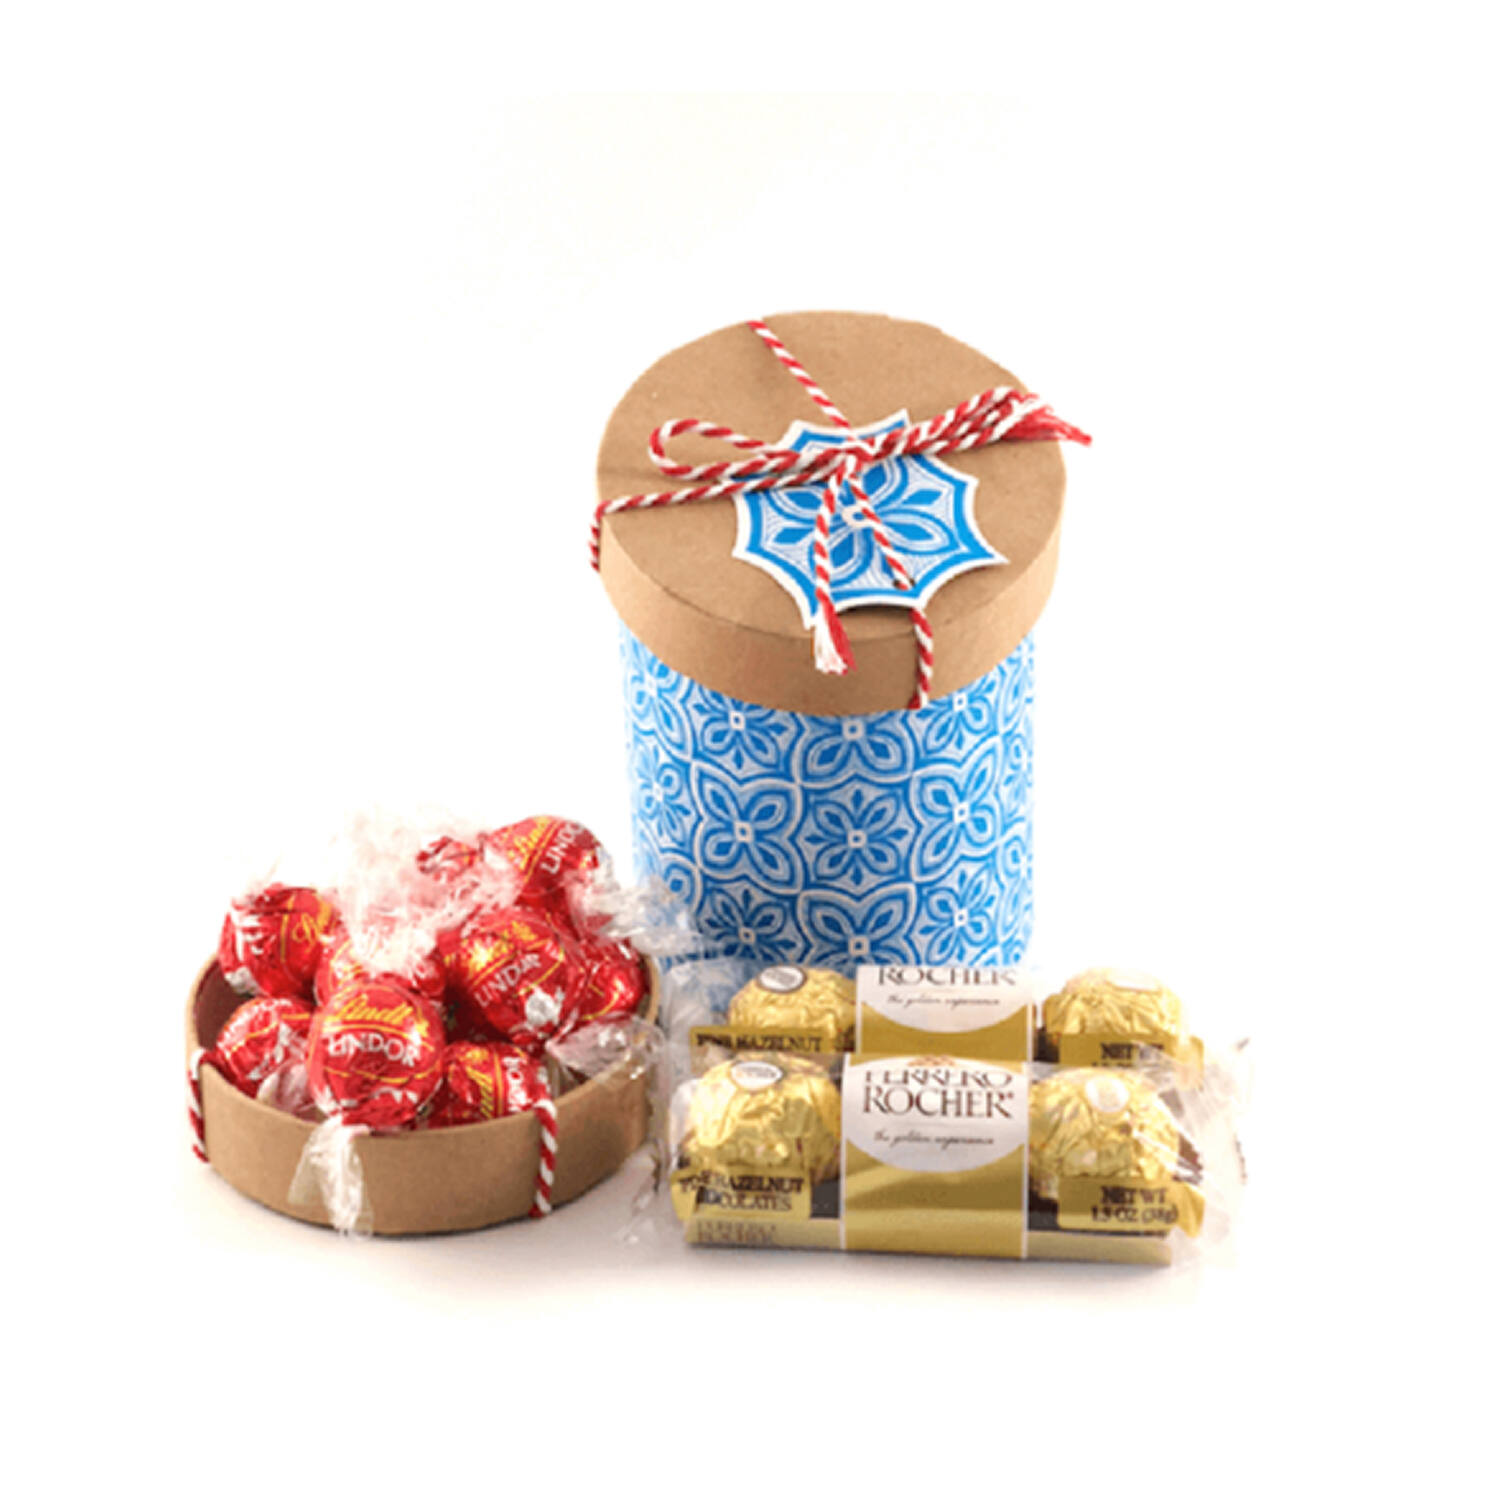 Jubilant Celebrations Personalized New Year Hamper: Gift/Send New Year  Gifts Online JVS1271825 |IGP.com